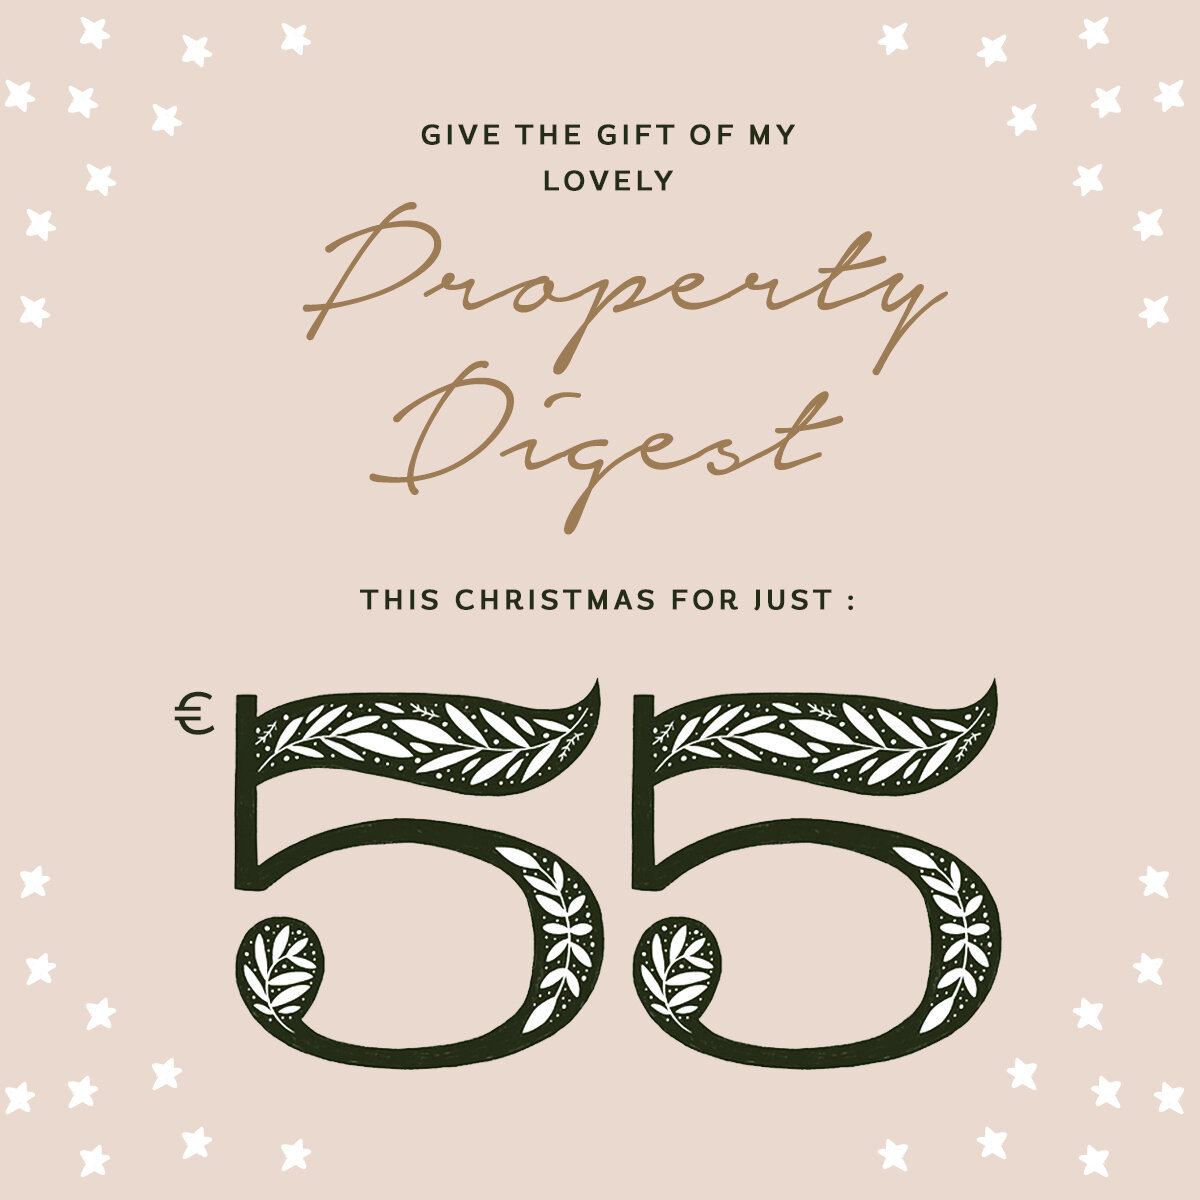 Property Digest As a Gift - 1 Years Subscription